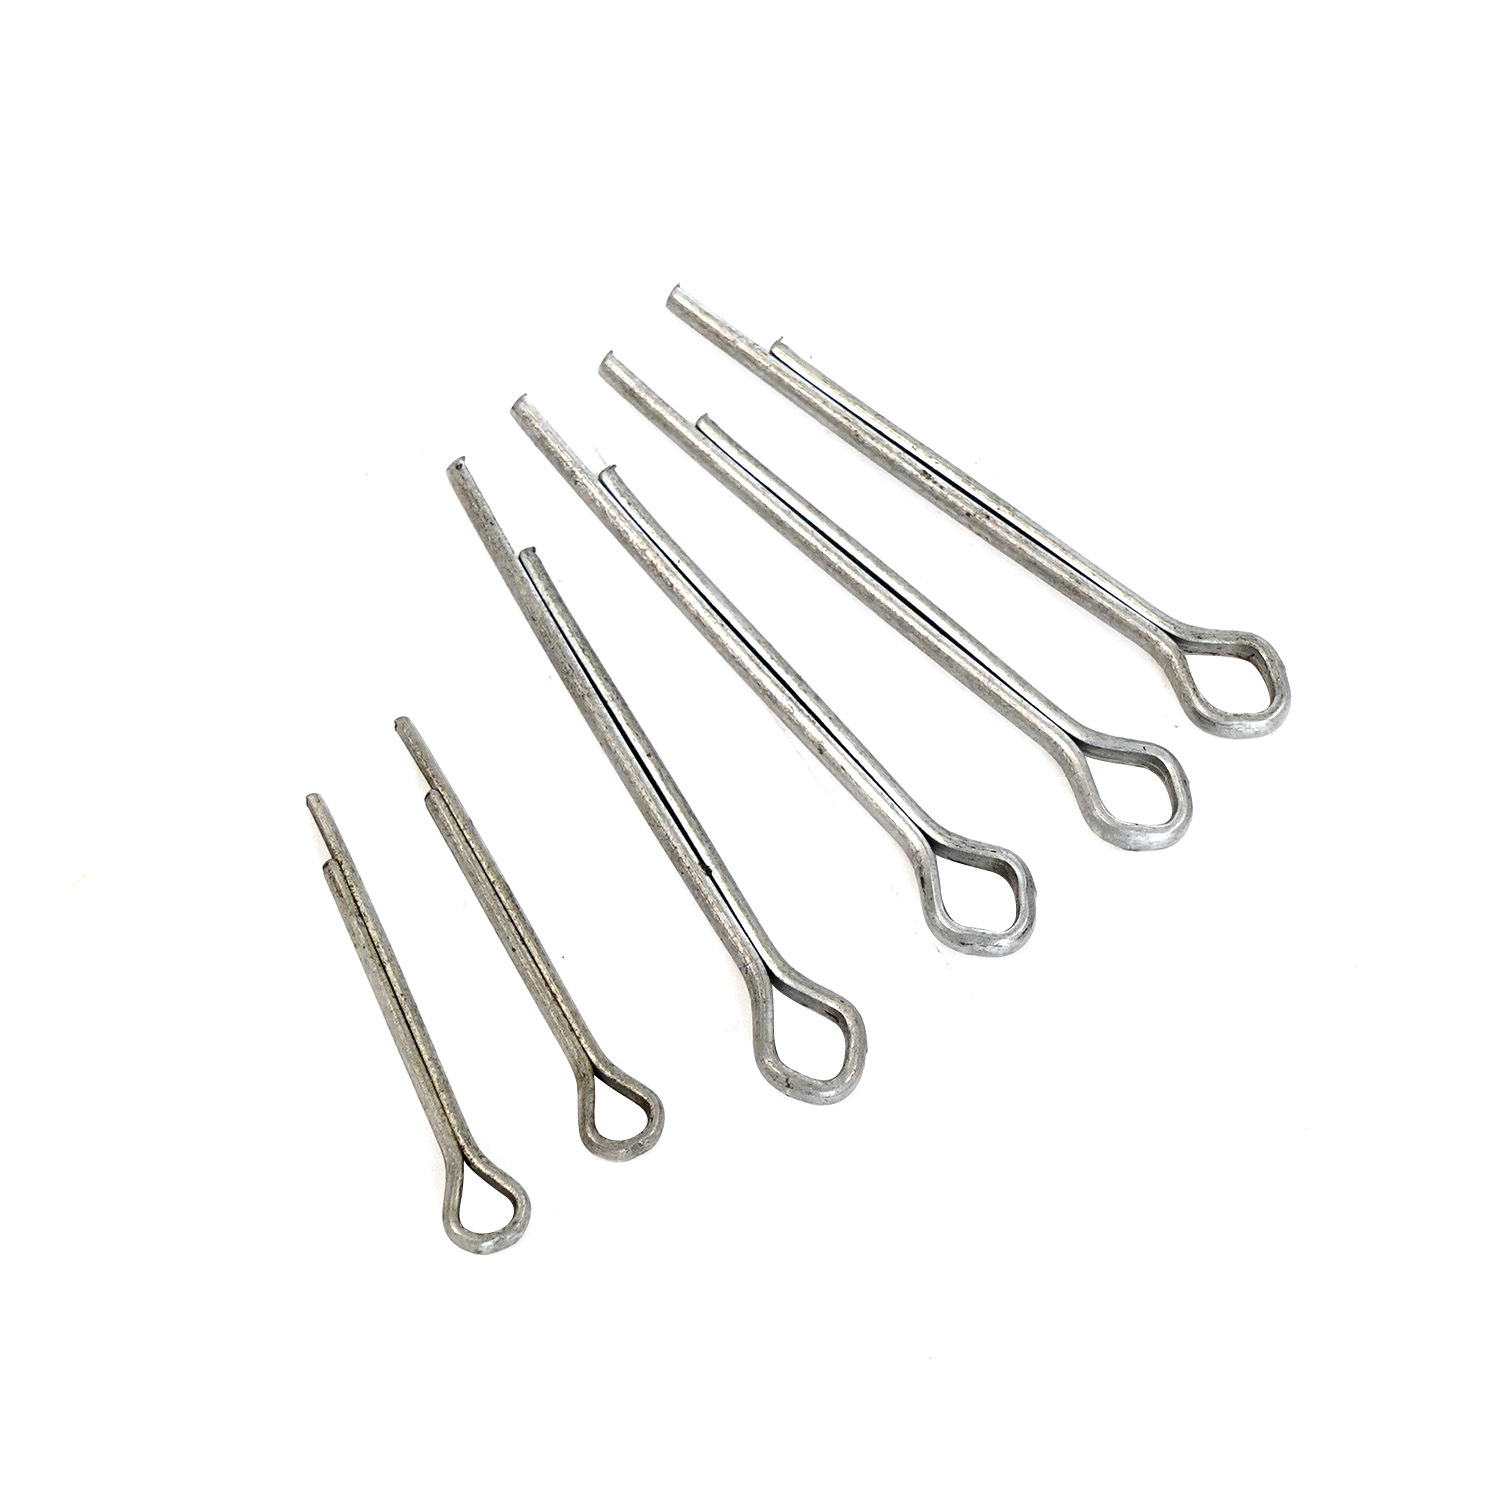 China Factory Price High Quality DIN94 ISO1234 Zinc Plated YZP Split Cotter Pin